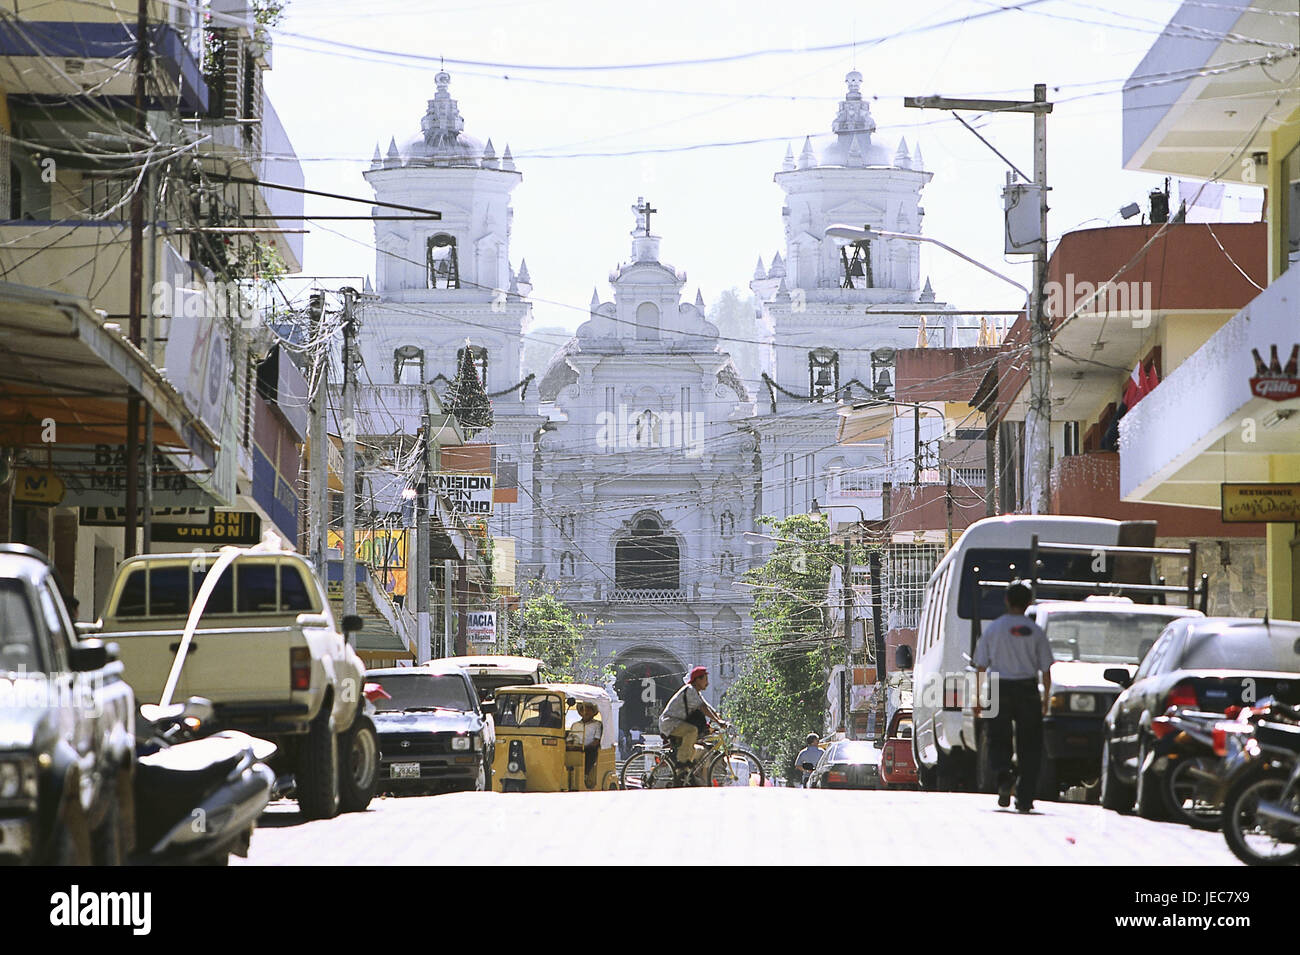 Guatemala, Esquipulas, basilica, street scene, Central America, Latin America, destination, place of interest, church, sacred construction, architecture, church, faith, religion, Christianity, street, traffic, cars, circuits, power supply lines, place of pilgrimage, Stock Photo